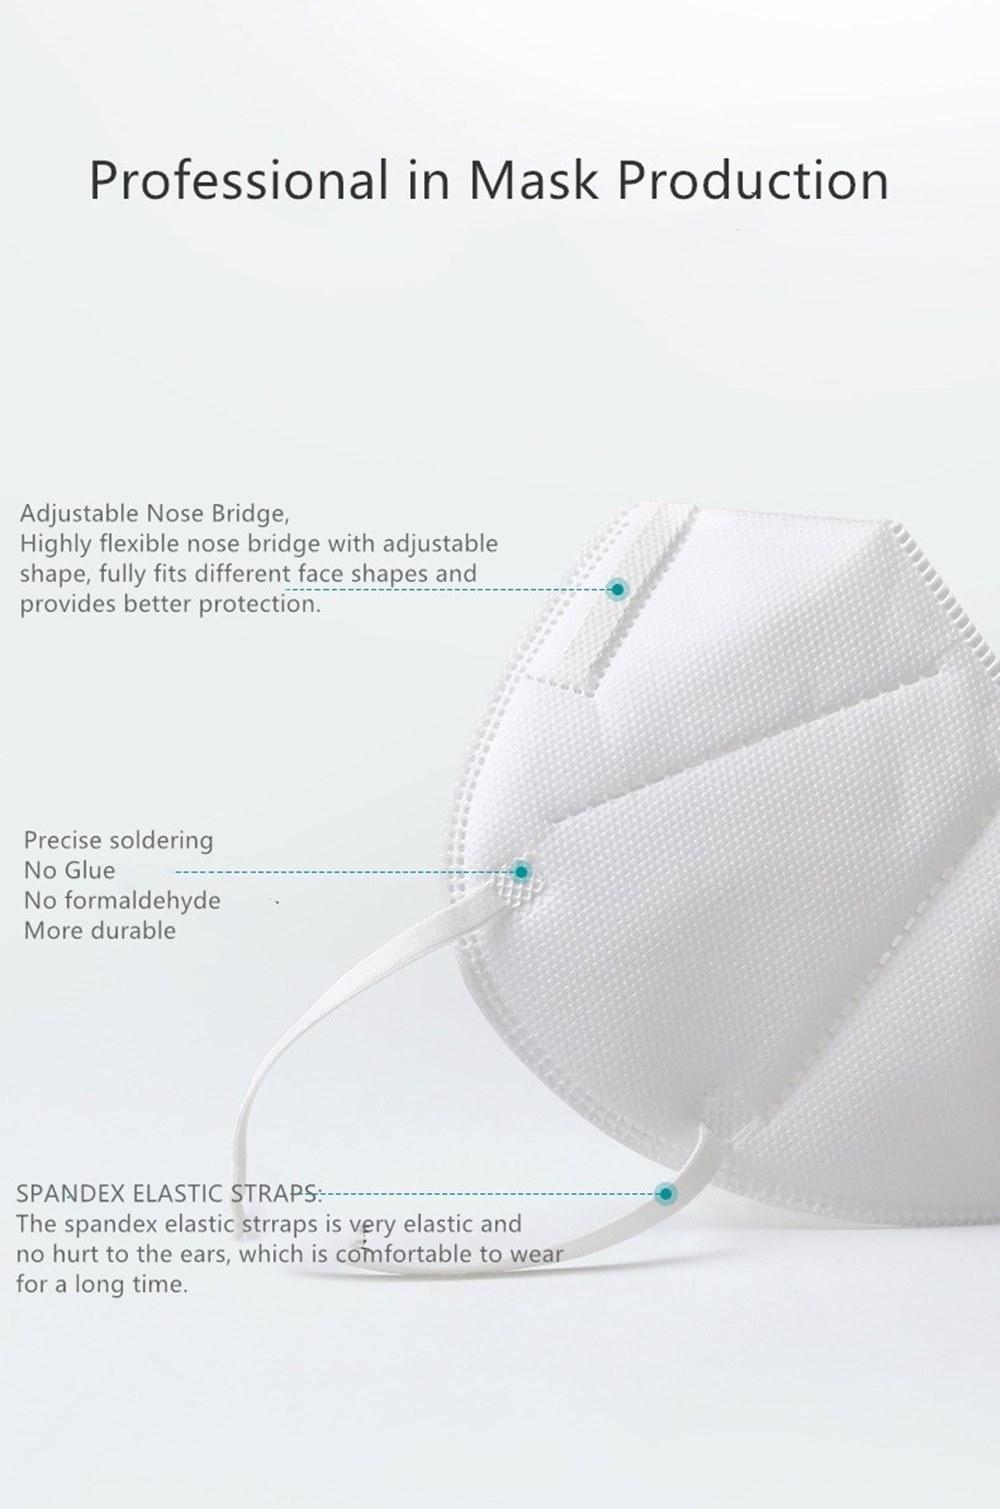 TOP QUALITY Workwear CE Approved NB 2163 EN149 FFP2 NR N95 KN95 Respirator EUA Disposable Medical Surgical Half Face Mask